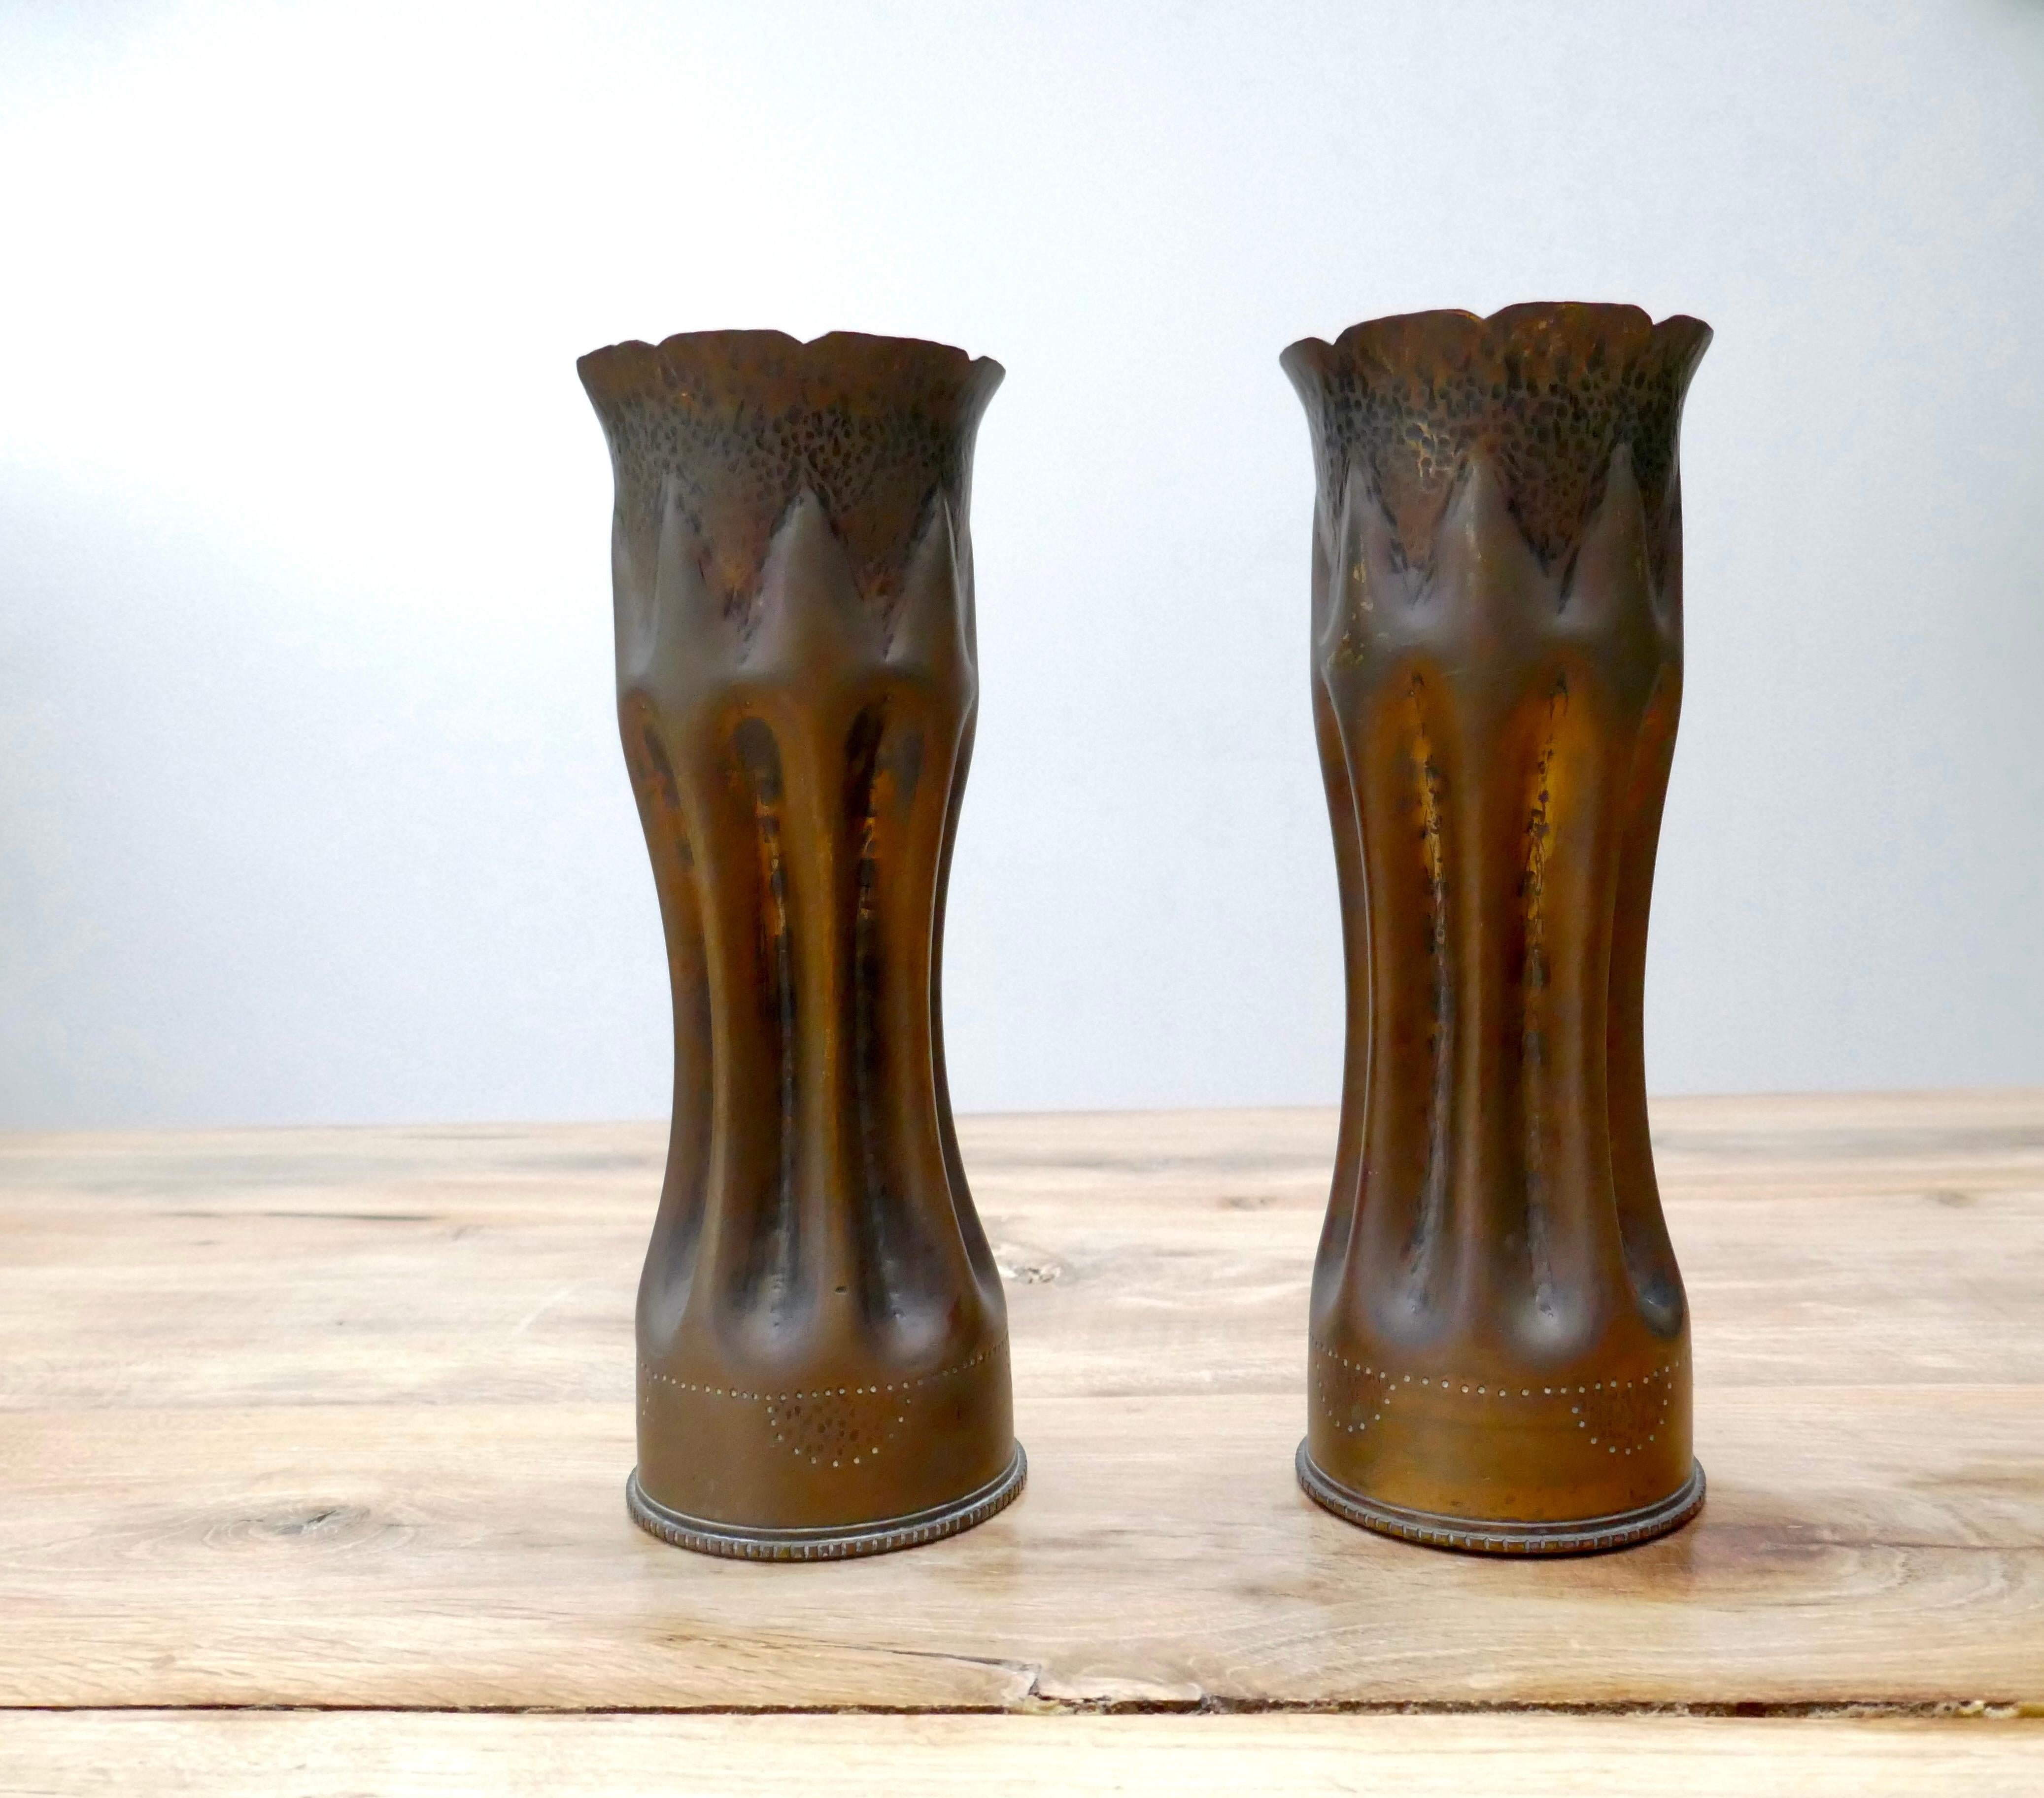 trench art for sale